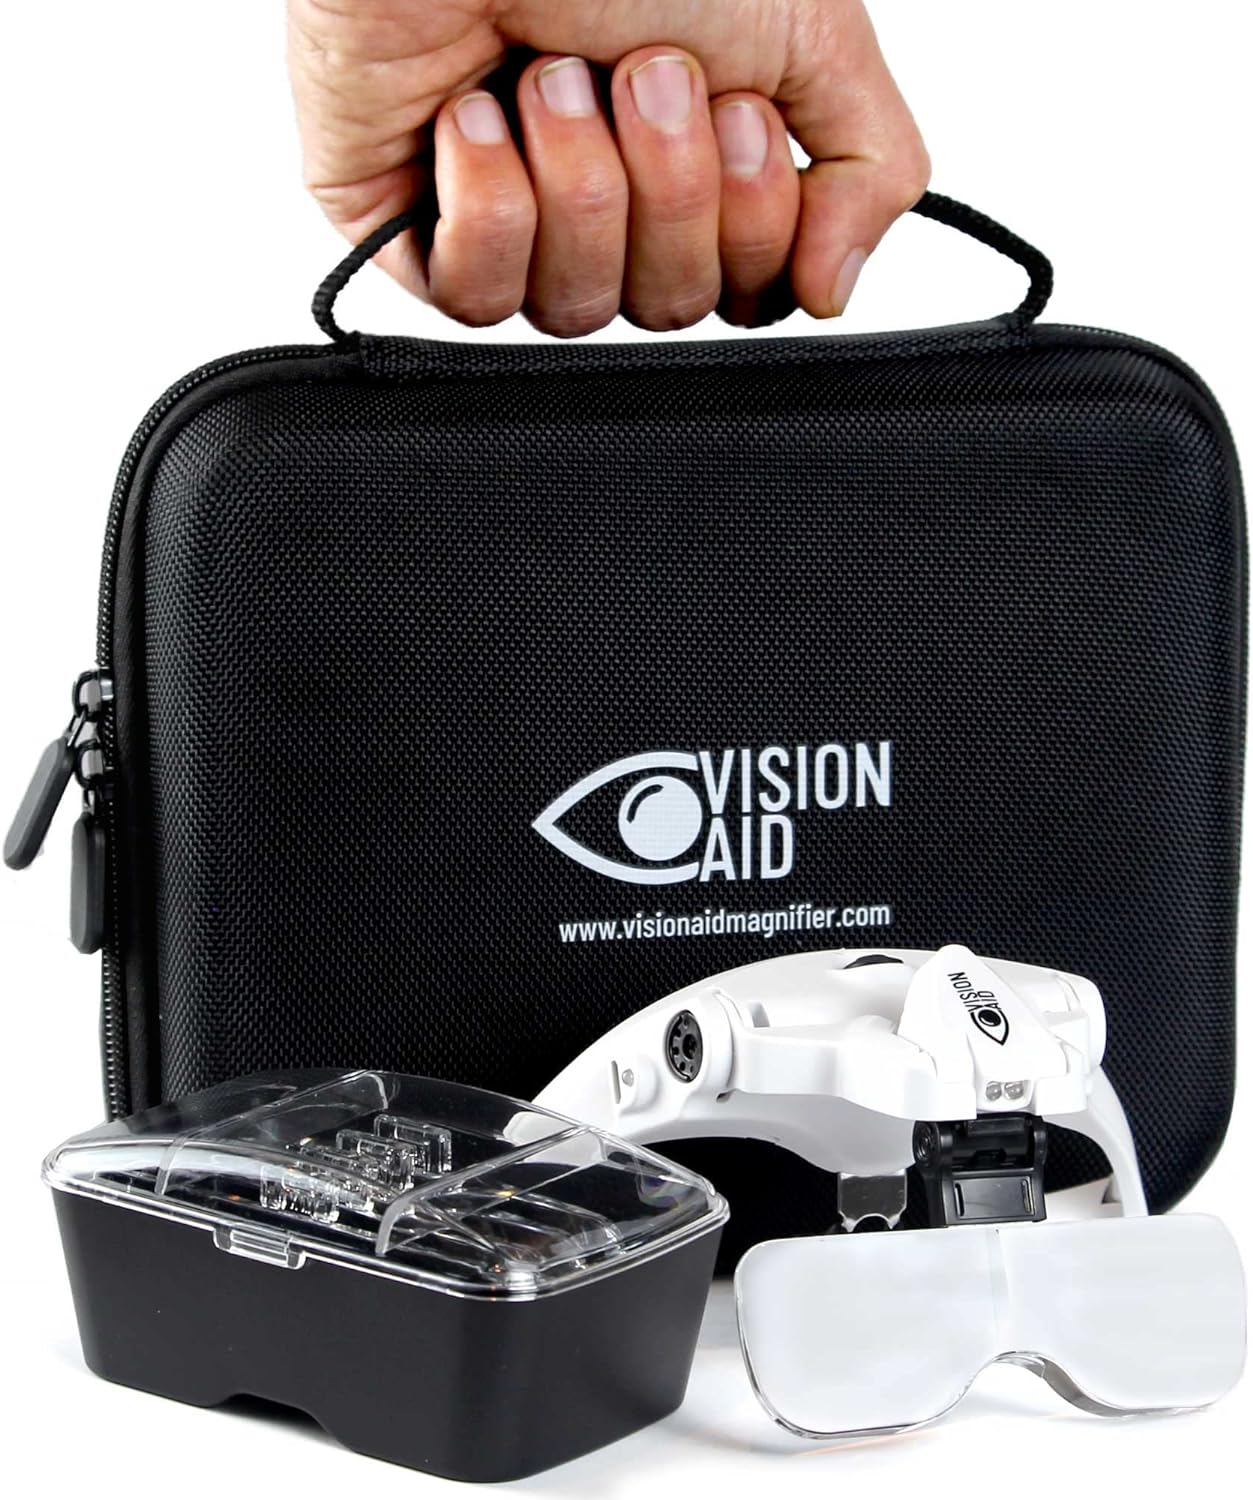 Vision Aid Magnifying Glasses with LED Light, 5 Lenses, Headband, Storage Case | Hands Free Lighted Head Mount Magnifier for Hobby Crafts